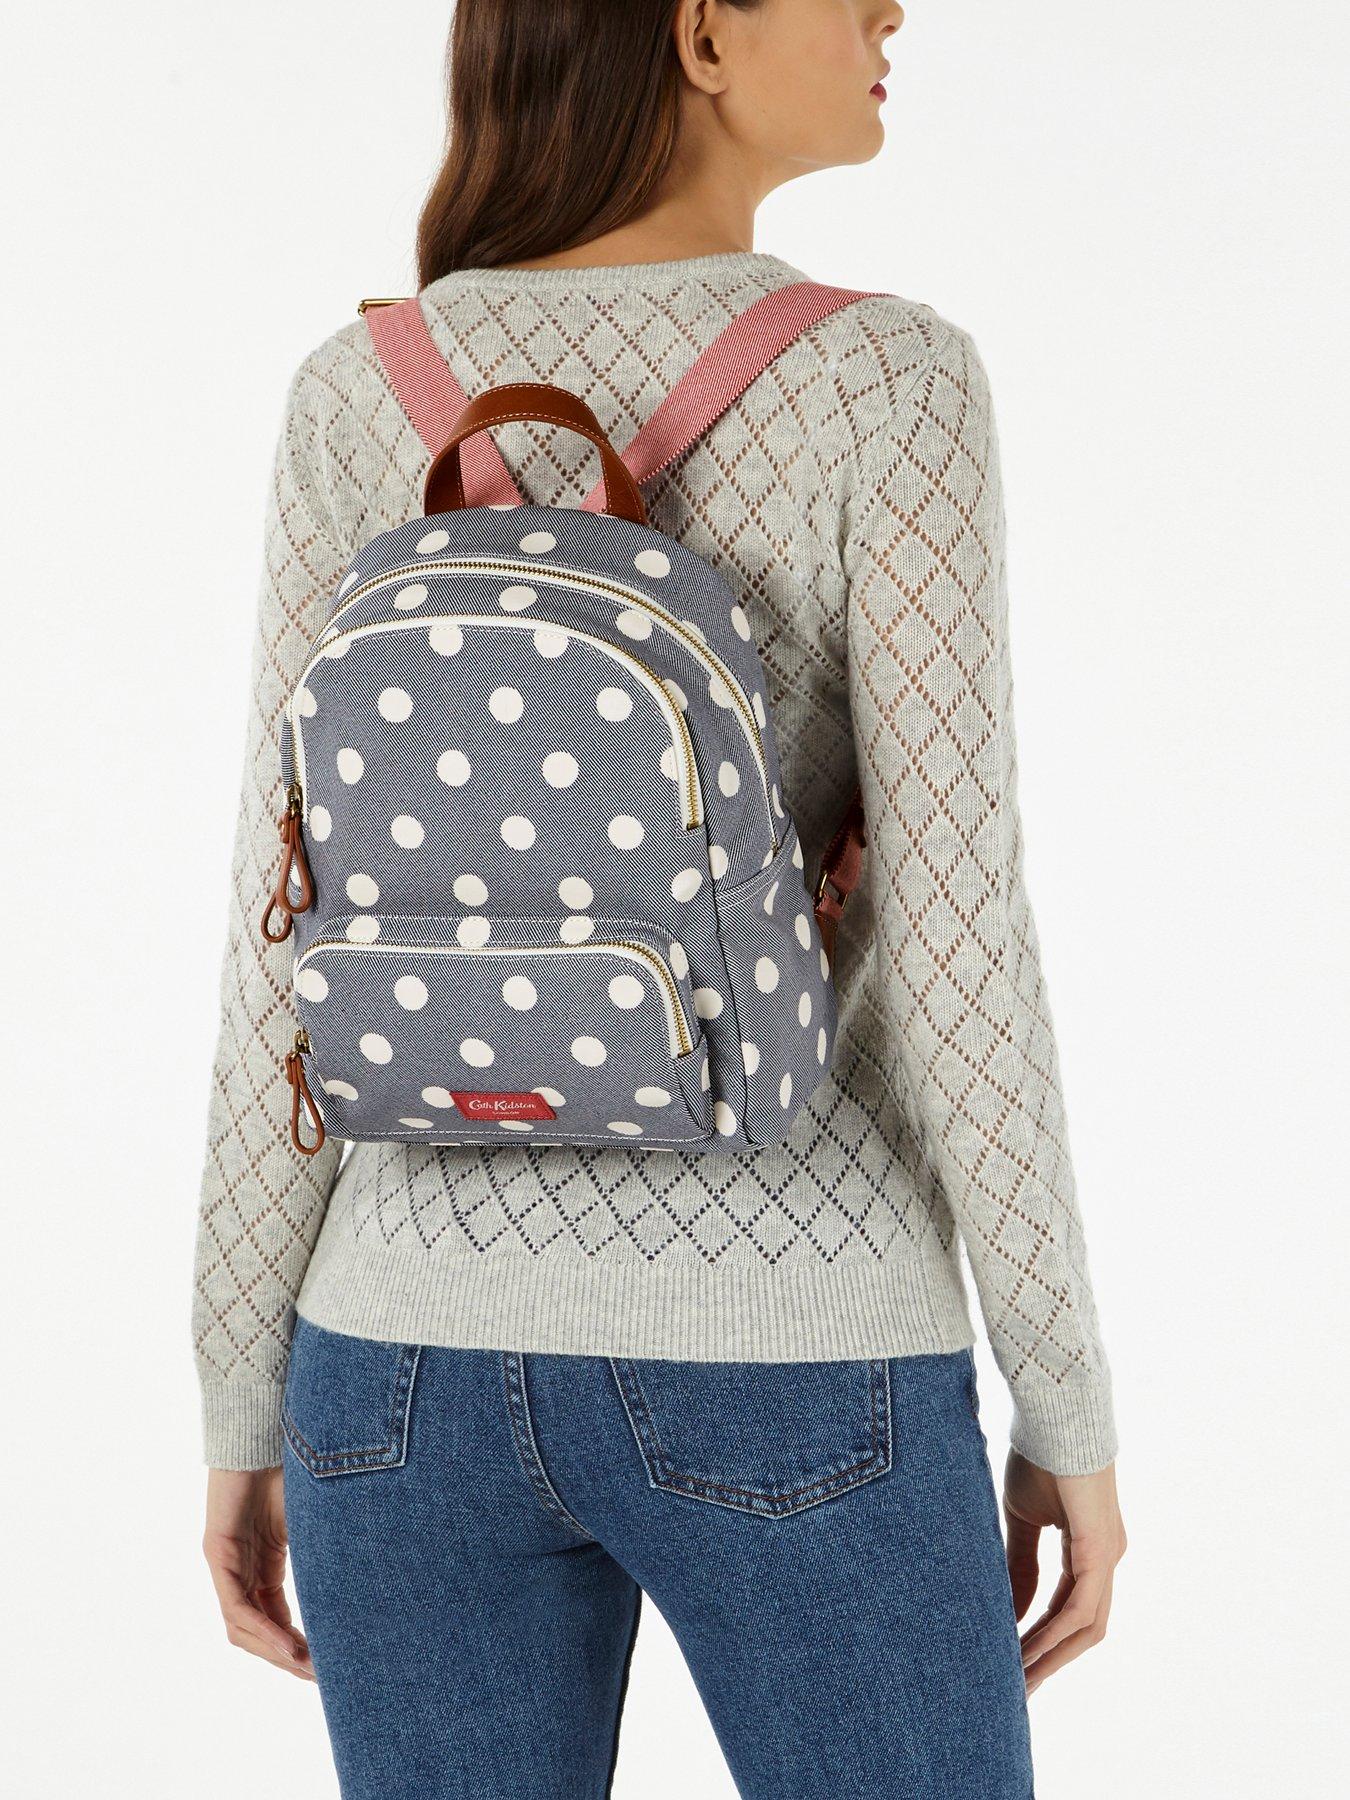 cath kidston small backpack